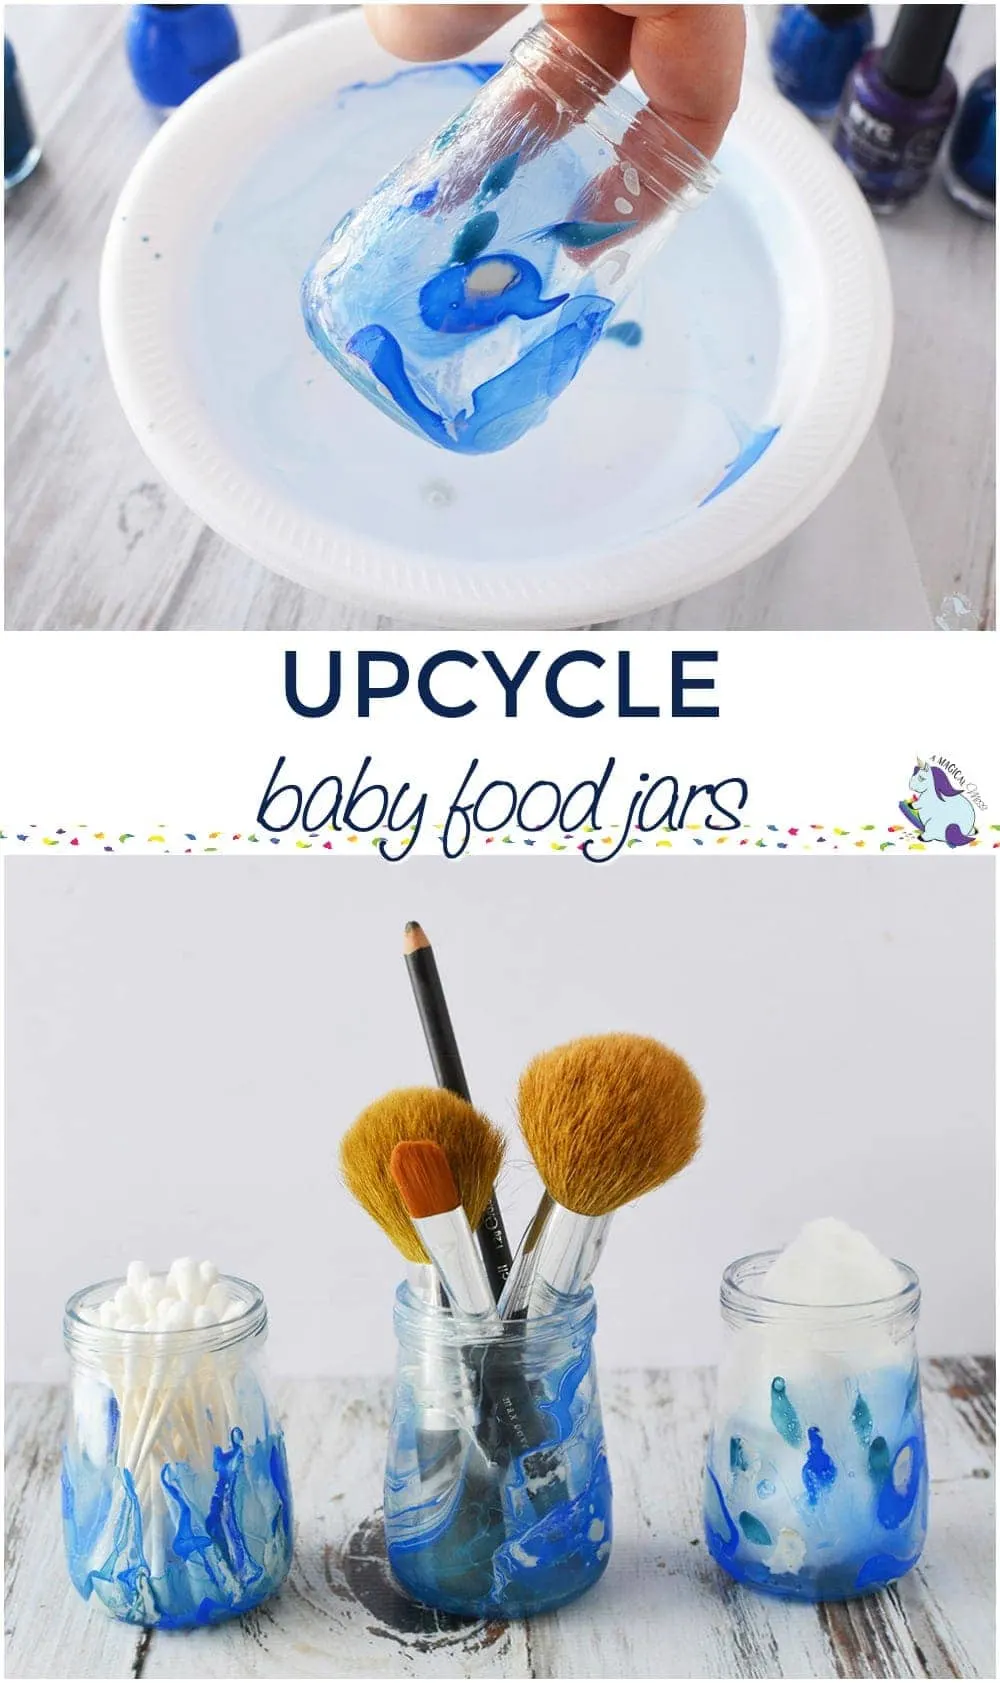 https://amagicalmess.com/wp-content/uploads/2018/03/Upcycle-Empty-Baby-Food-Jars-into-Storage-Containers-pin.jpg.webp